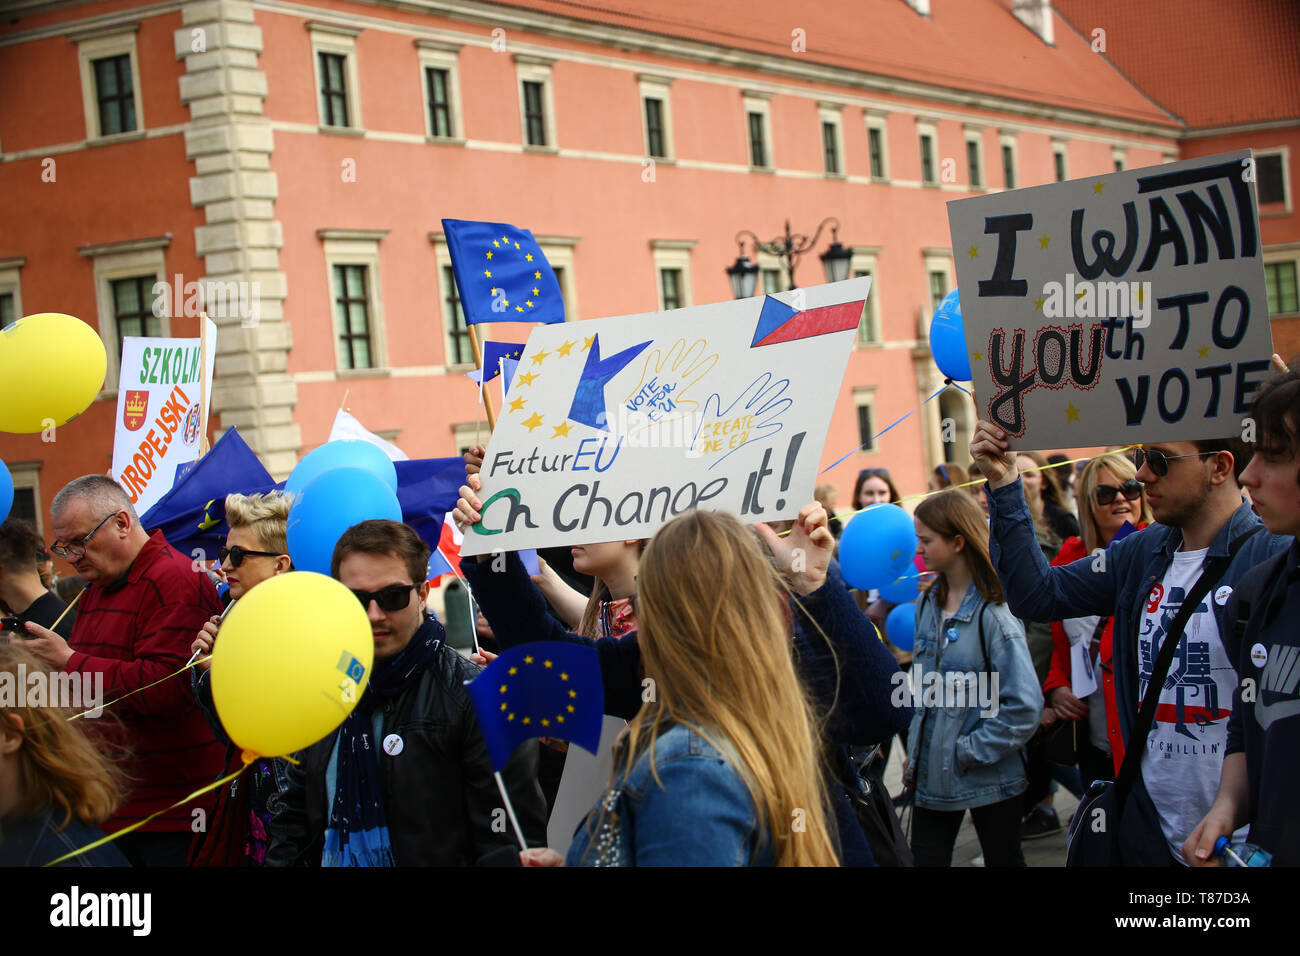 Poland, Warsaw, 11th May 2019: Activists and Robert Schuman foundtion hold pro European parade (Parada Schumana) in advance of the elections of the European Parliament. ©Jake Ratz/Alamy Stock Photo